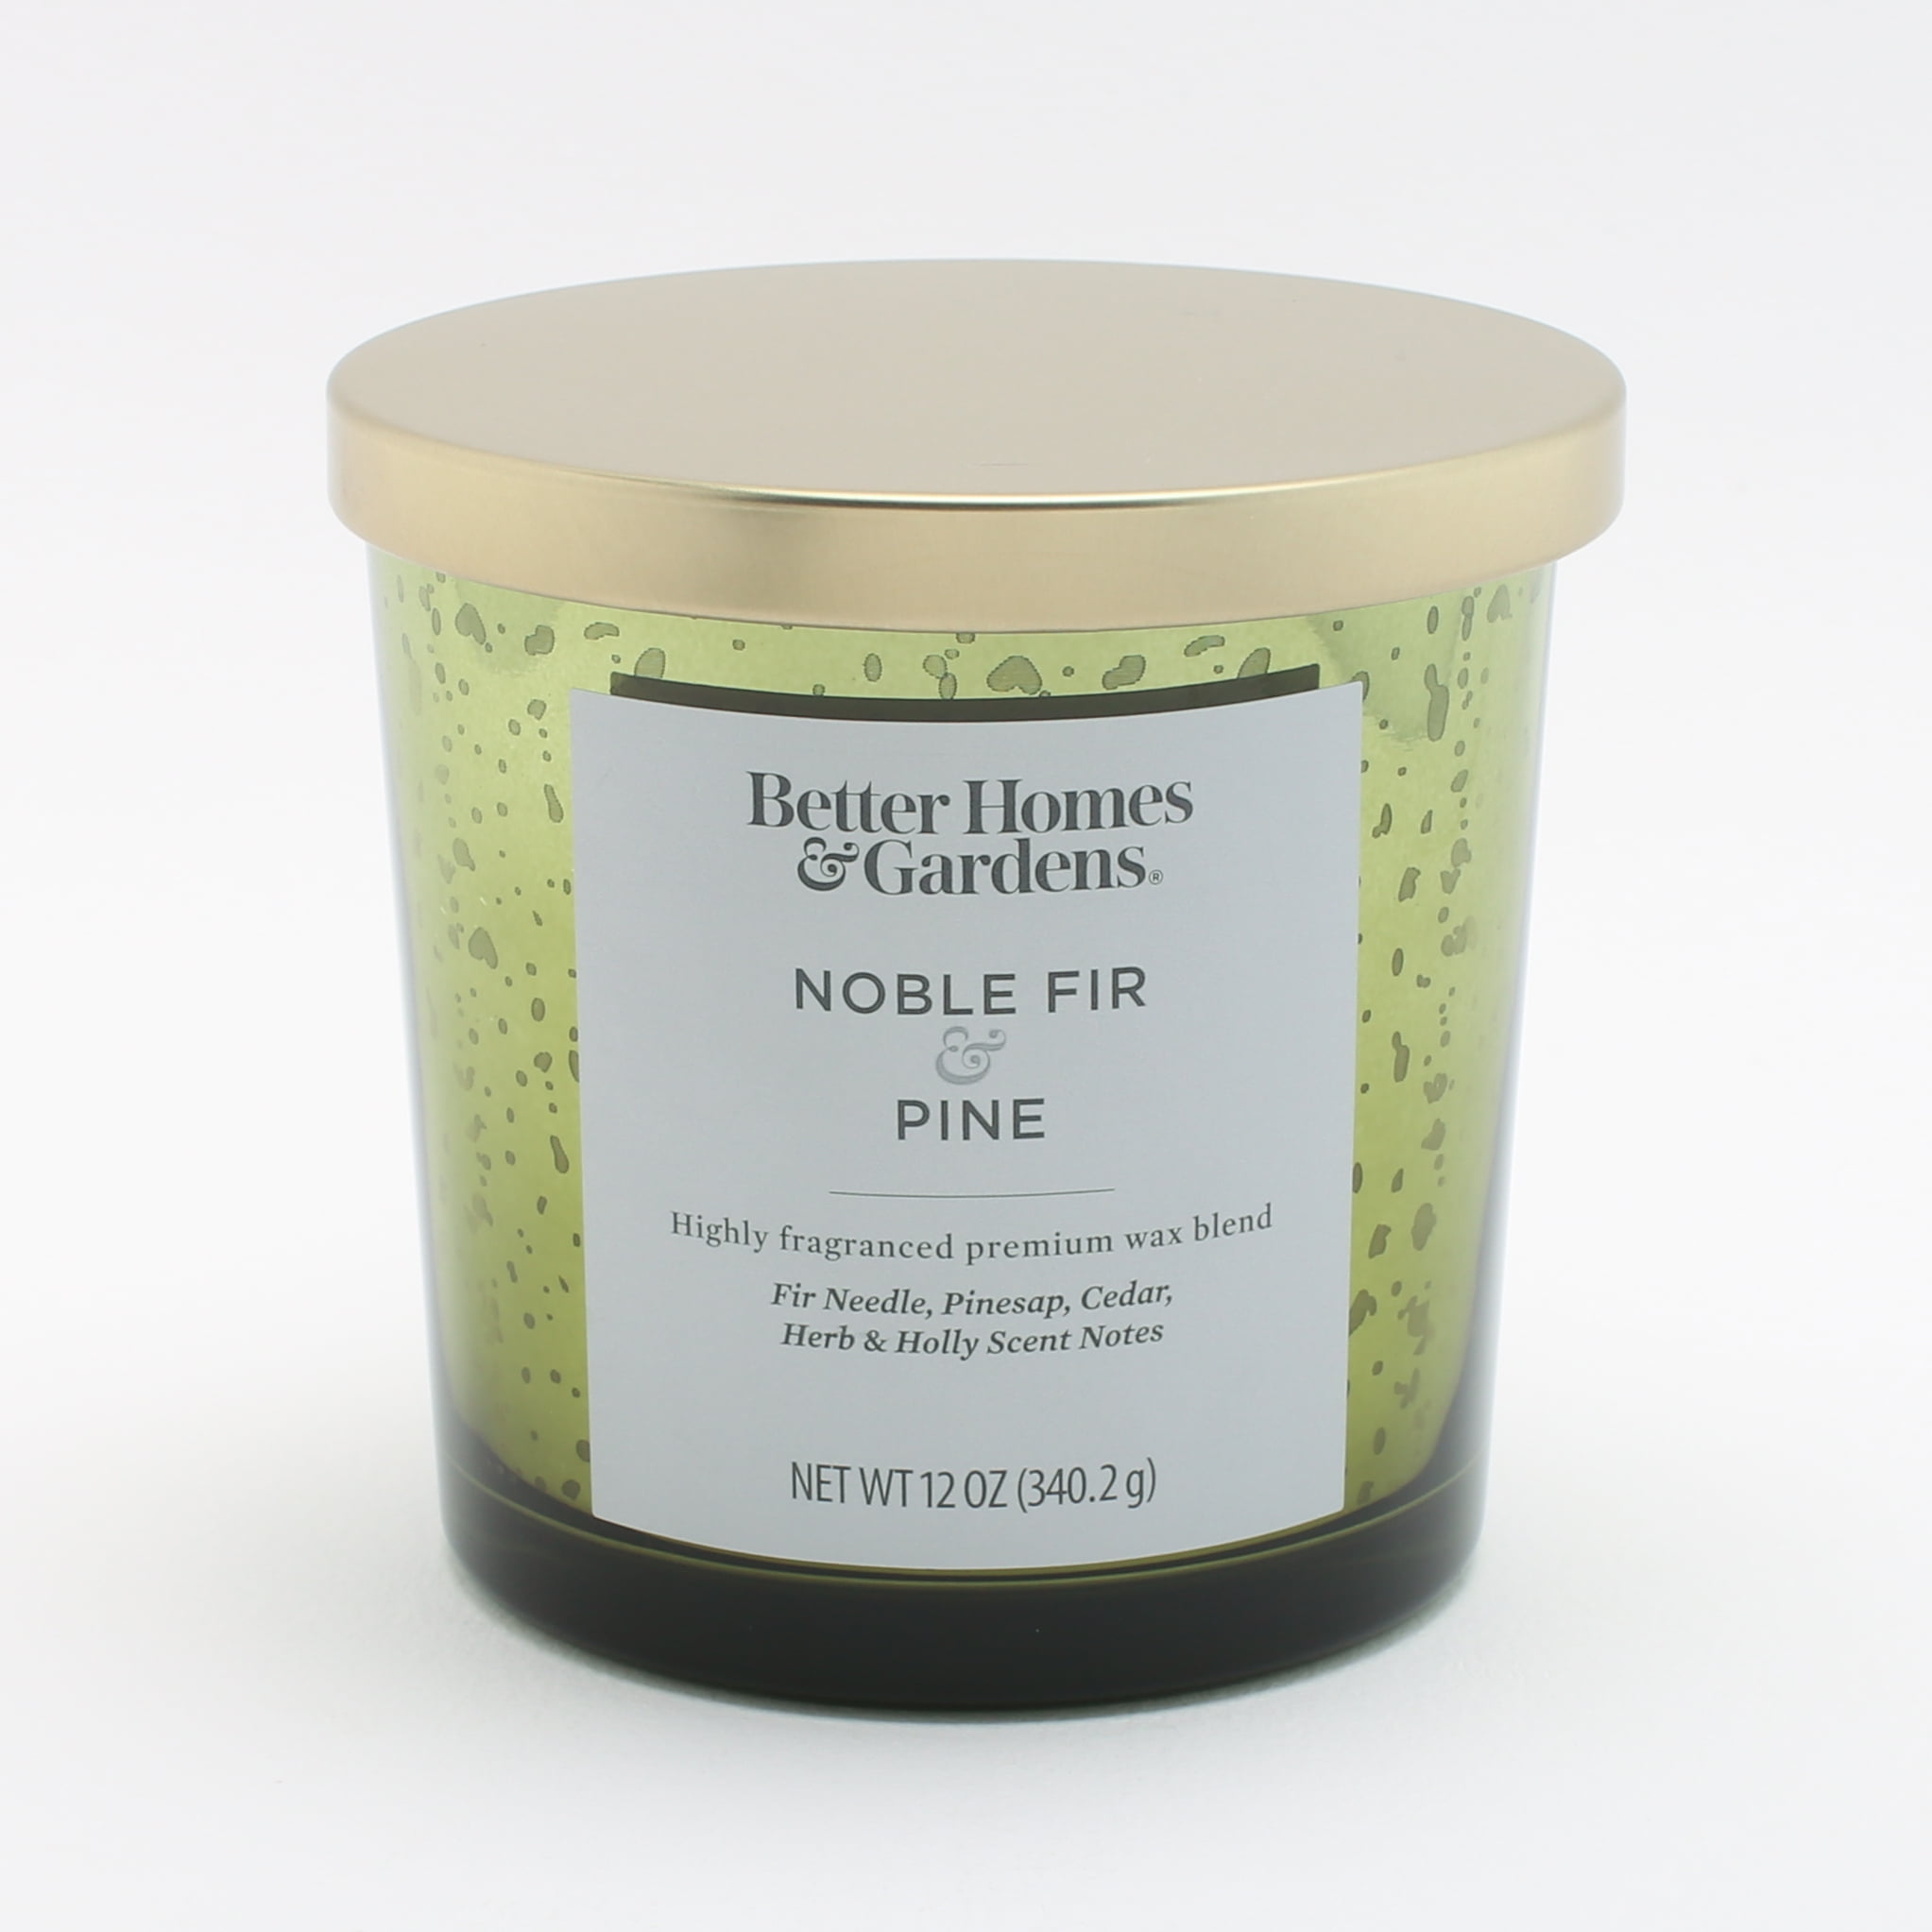 Better Homes & Gardens 12oz Noble Fir & Pine Scented Single-Wick Mercury Jar Candle